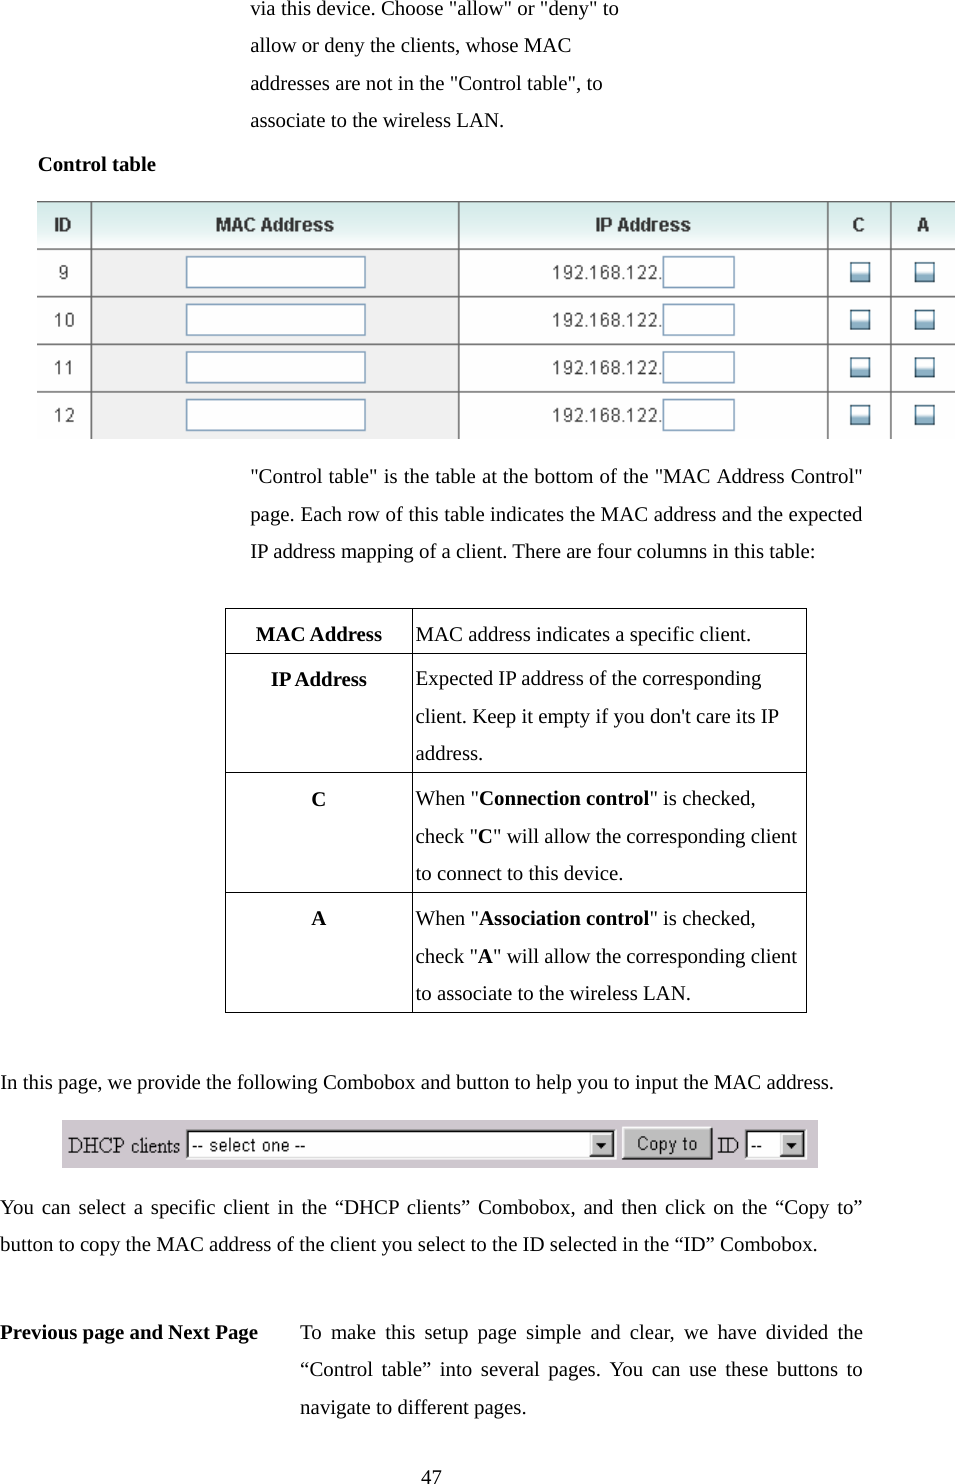 via this device. Choose &quot;allow&quot; or &quot;deny&quot; to allow or deny the clients, whose MAC addresses are not in the &quot;Control table&quot;, to associate to the wireless LAN. Control table  &quot;Control table&quot; is the table at the bottom of the &quot;MAC Address Control&quot; page. Each row of this table indicates the MAC address and the expected IP address mapping of a client. There are four columns in this table:  MAC Address  MAC address indicates a specific client. IP Address  Expected IP address of the corresponding client. Keep it empty if you don&apos;t care its IP address. C  When &quot;Connection control&quot; is checked, check &quot;C&quot; will allow the corresponding client to connect to this device. A  When &quot;Association control&quot; is checked, check &quot;A&quot; will allow the corresponding client to associate to the wireless LAN.  In this page, we provide the following Combobox and button to help you to input the MAC address.  You can select a specific client in the “DHCP clients” Combobox, and then click on the “Copy to” button to copy the MAC address of the client you select to the ID selected in the “ID” Combobox.  Previous page and Next Page  To make this setup page simple and clear, we have divided the “Control table” into several pages. You can use these buttons to navigate to different pages.  47